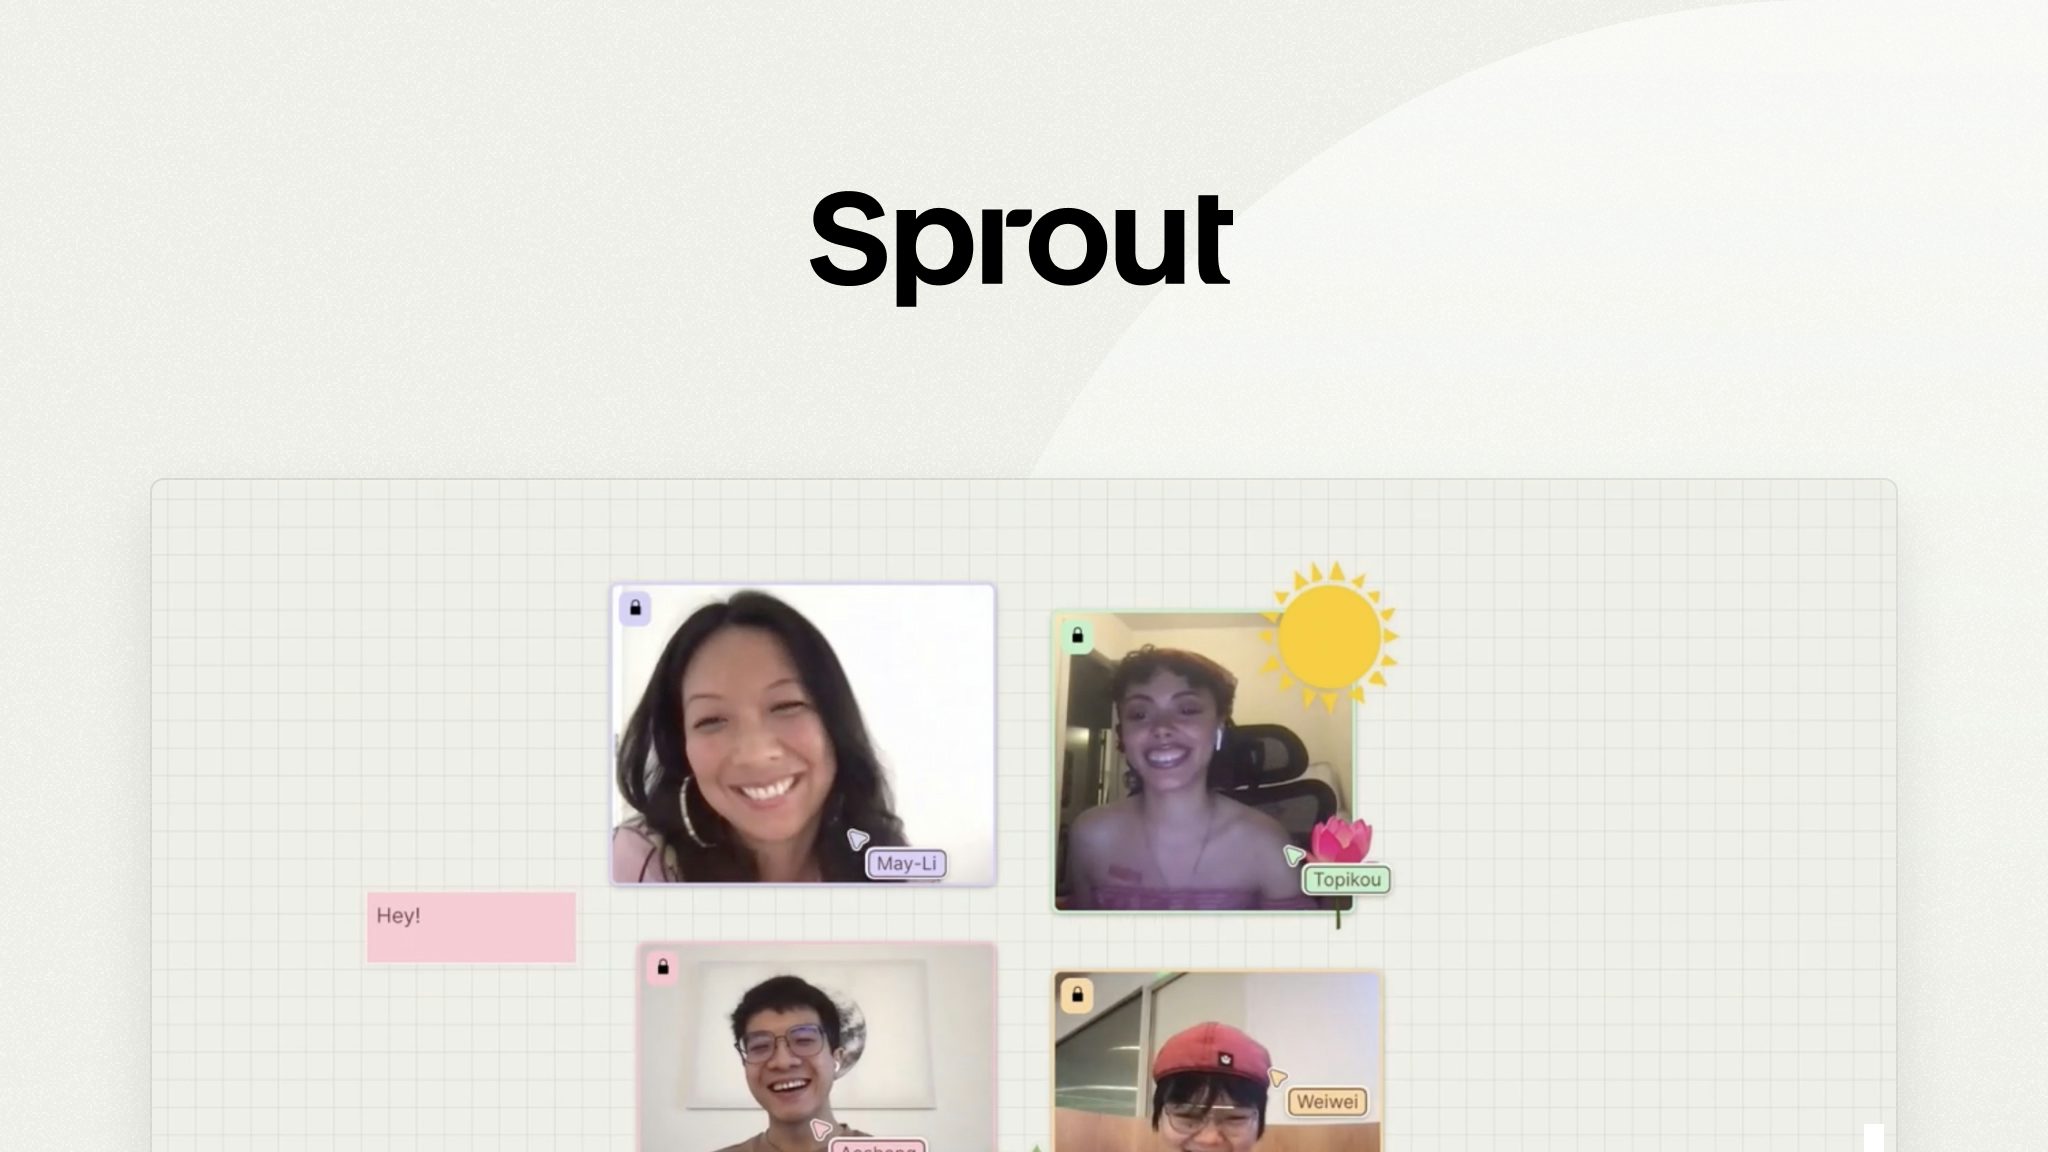 How Liveblocks enables Sprout’s multiplayer collaboration, allowing users to play together swiftly